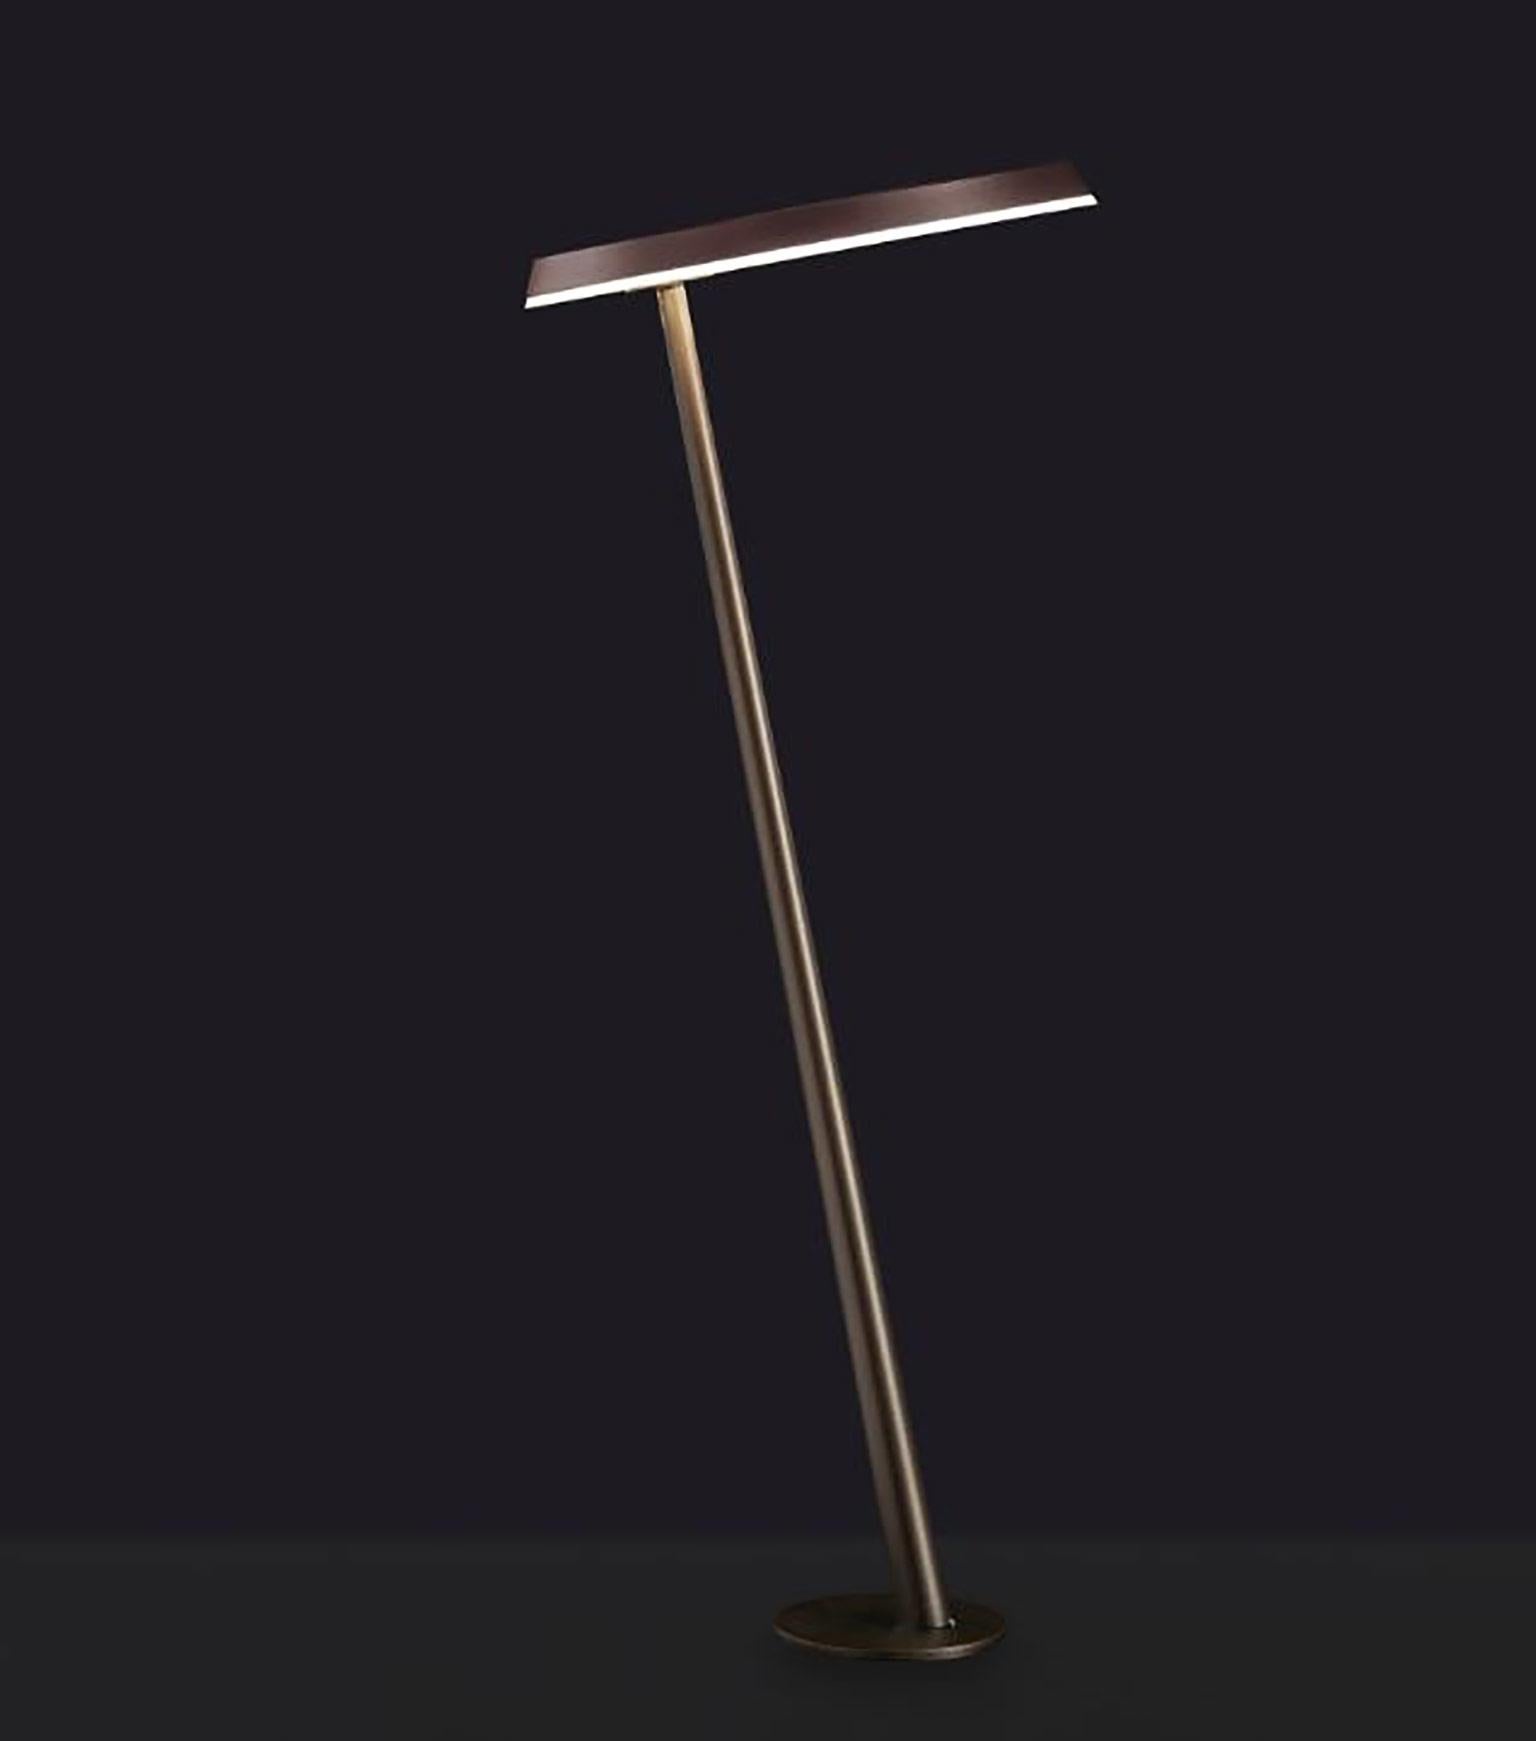 Amanita outdoor floor lamp by Mariana Pellegrino Soto for Oluce. The design of this fixture is two discs: one at the base which is slim and a second disk that is wider which houses the LED bulb. The two discs are connected by a slim slanted stem